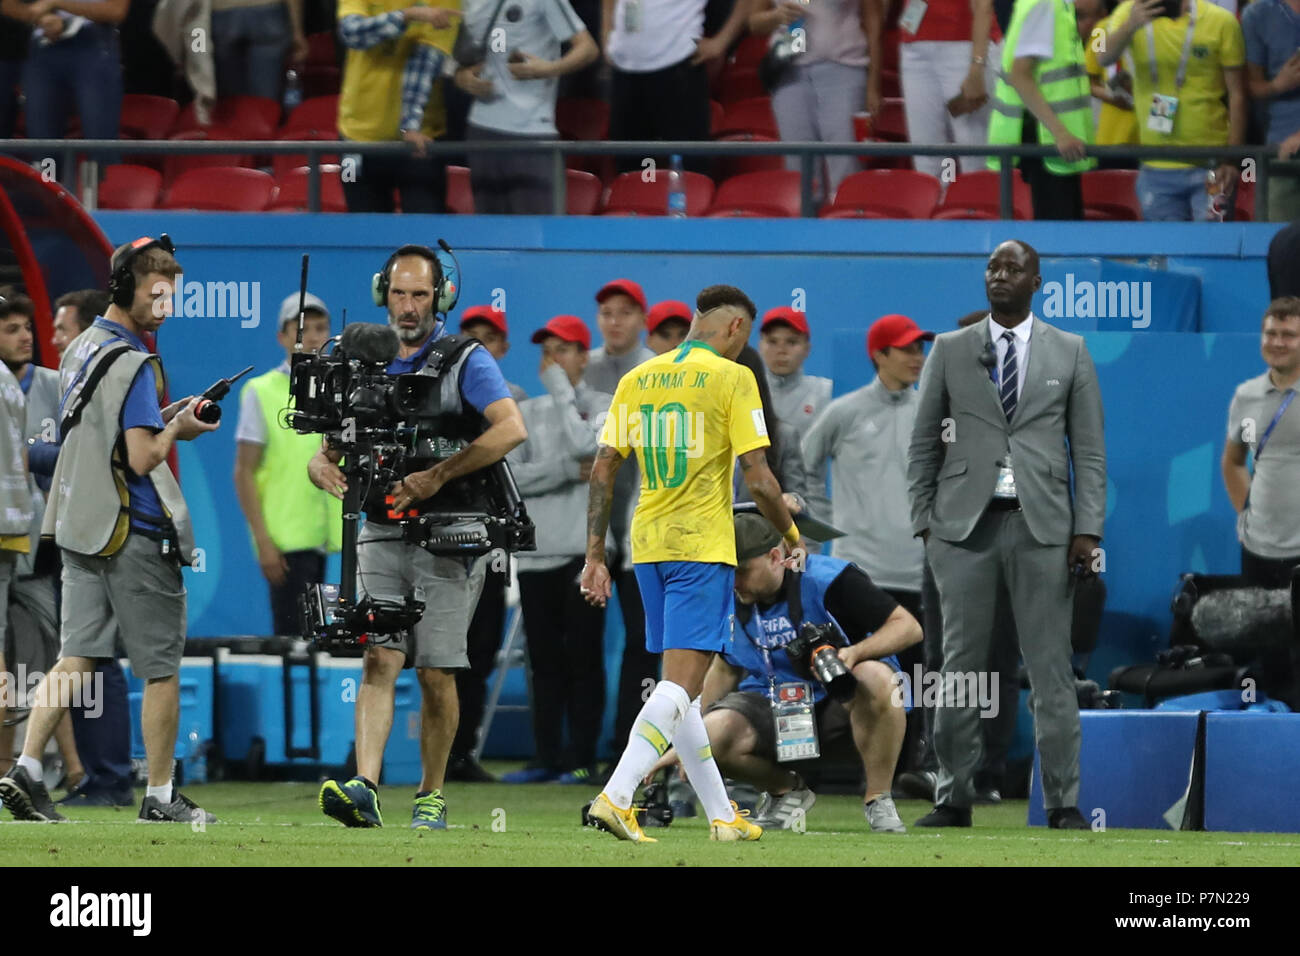 Kazan, Russia. 06th July, 2018. During the match between Brazil and Belgium valid for the quarterfinals of the 2018 World Cup finals, held in Arena Kazan, Russia. Belgium wins 2-1. Credit: Thiago Bernardes/Pacific Press/Alamy Live News Stock Photo